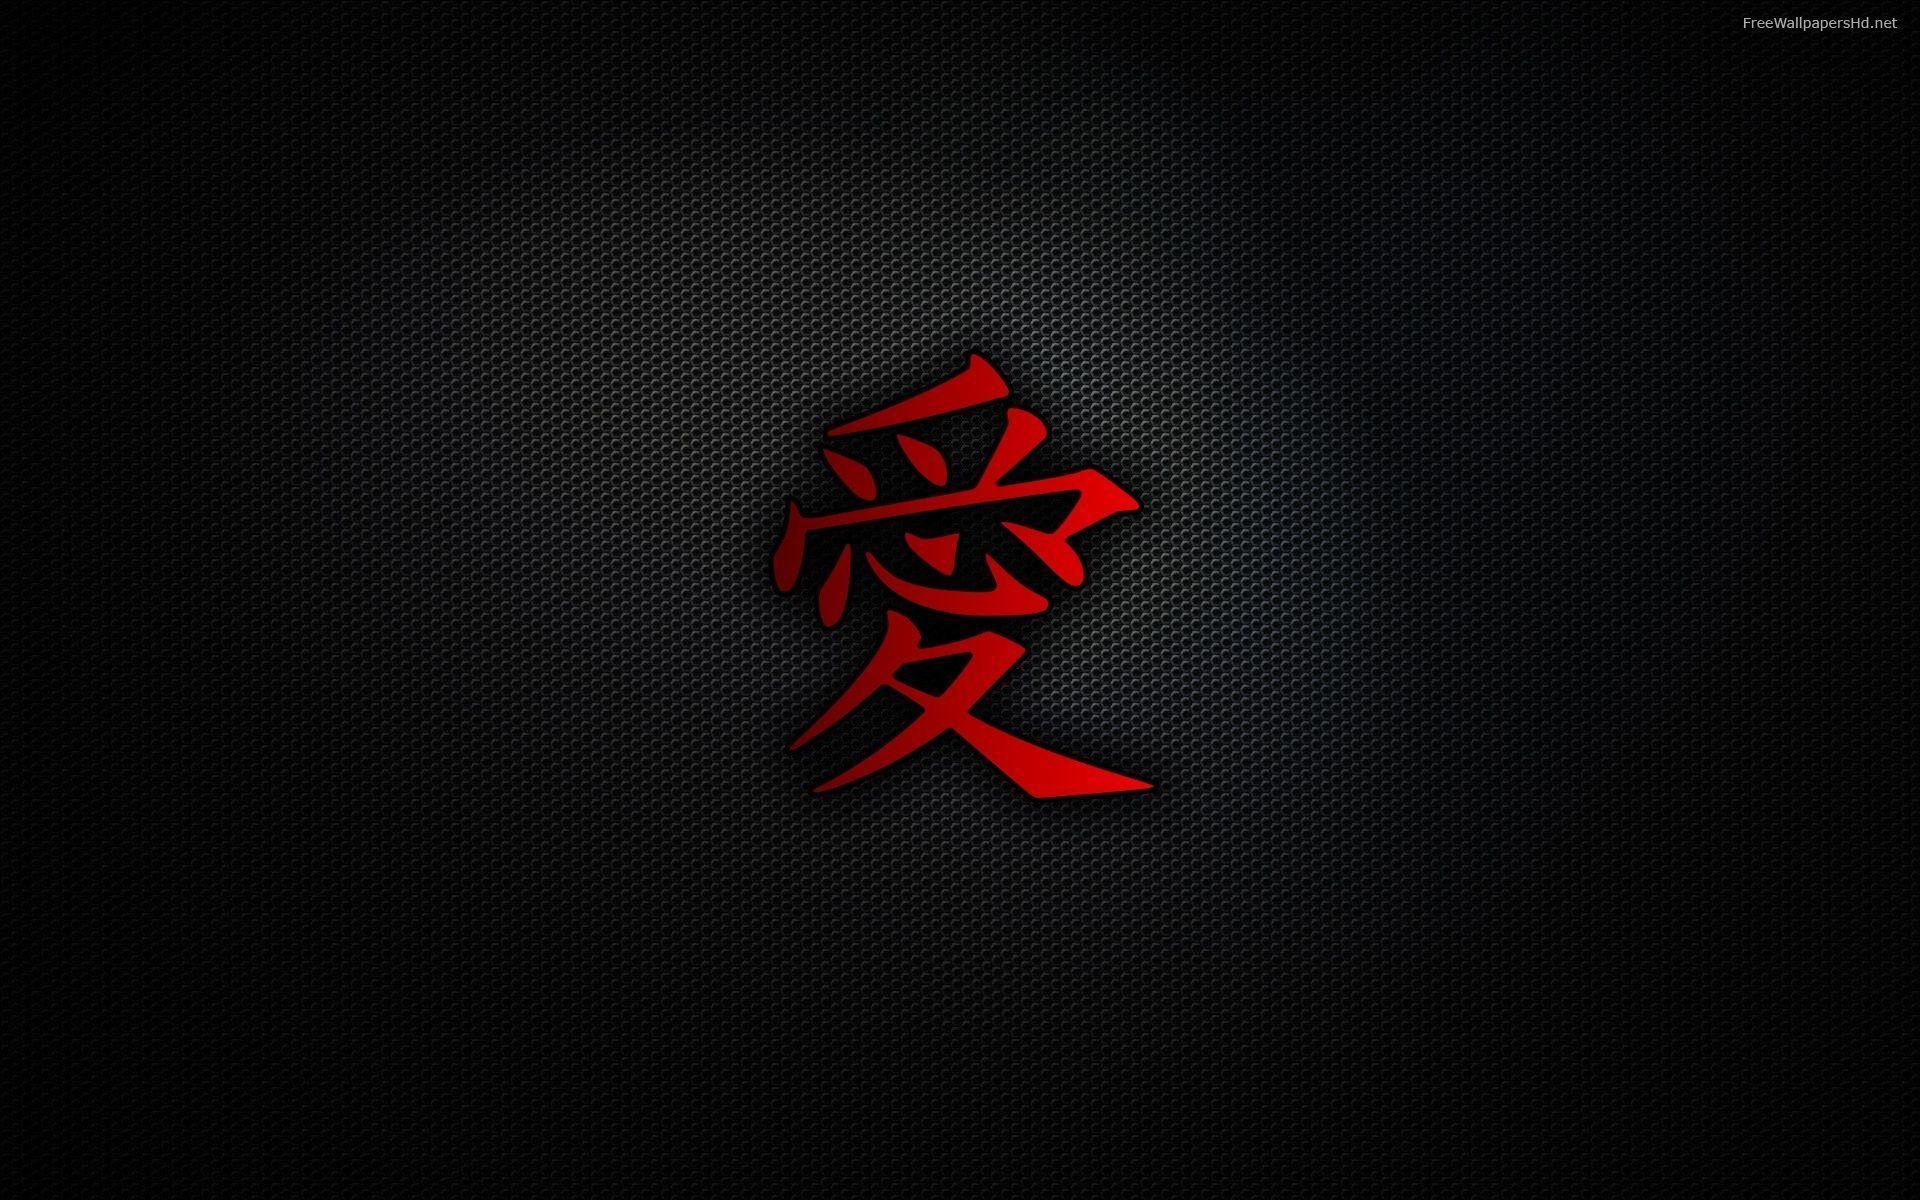 Wallpaper For > Chinese Words Wallpaper